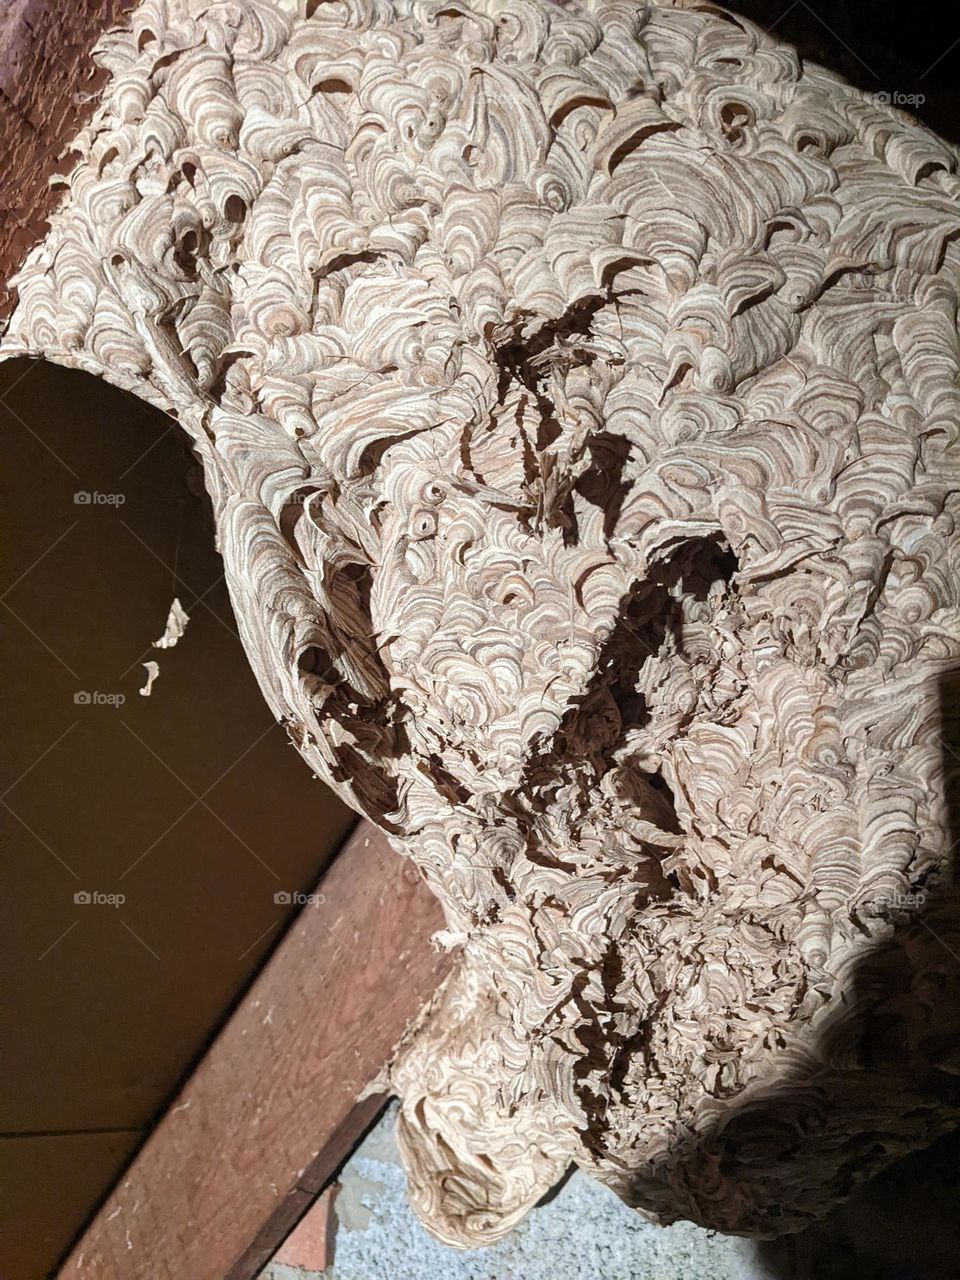 bees nest in the attic of a home